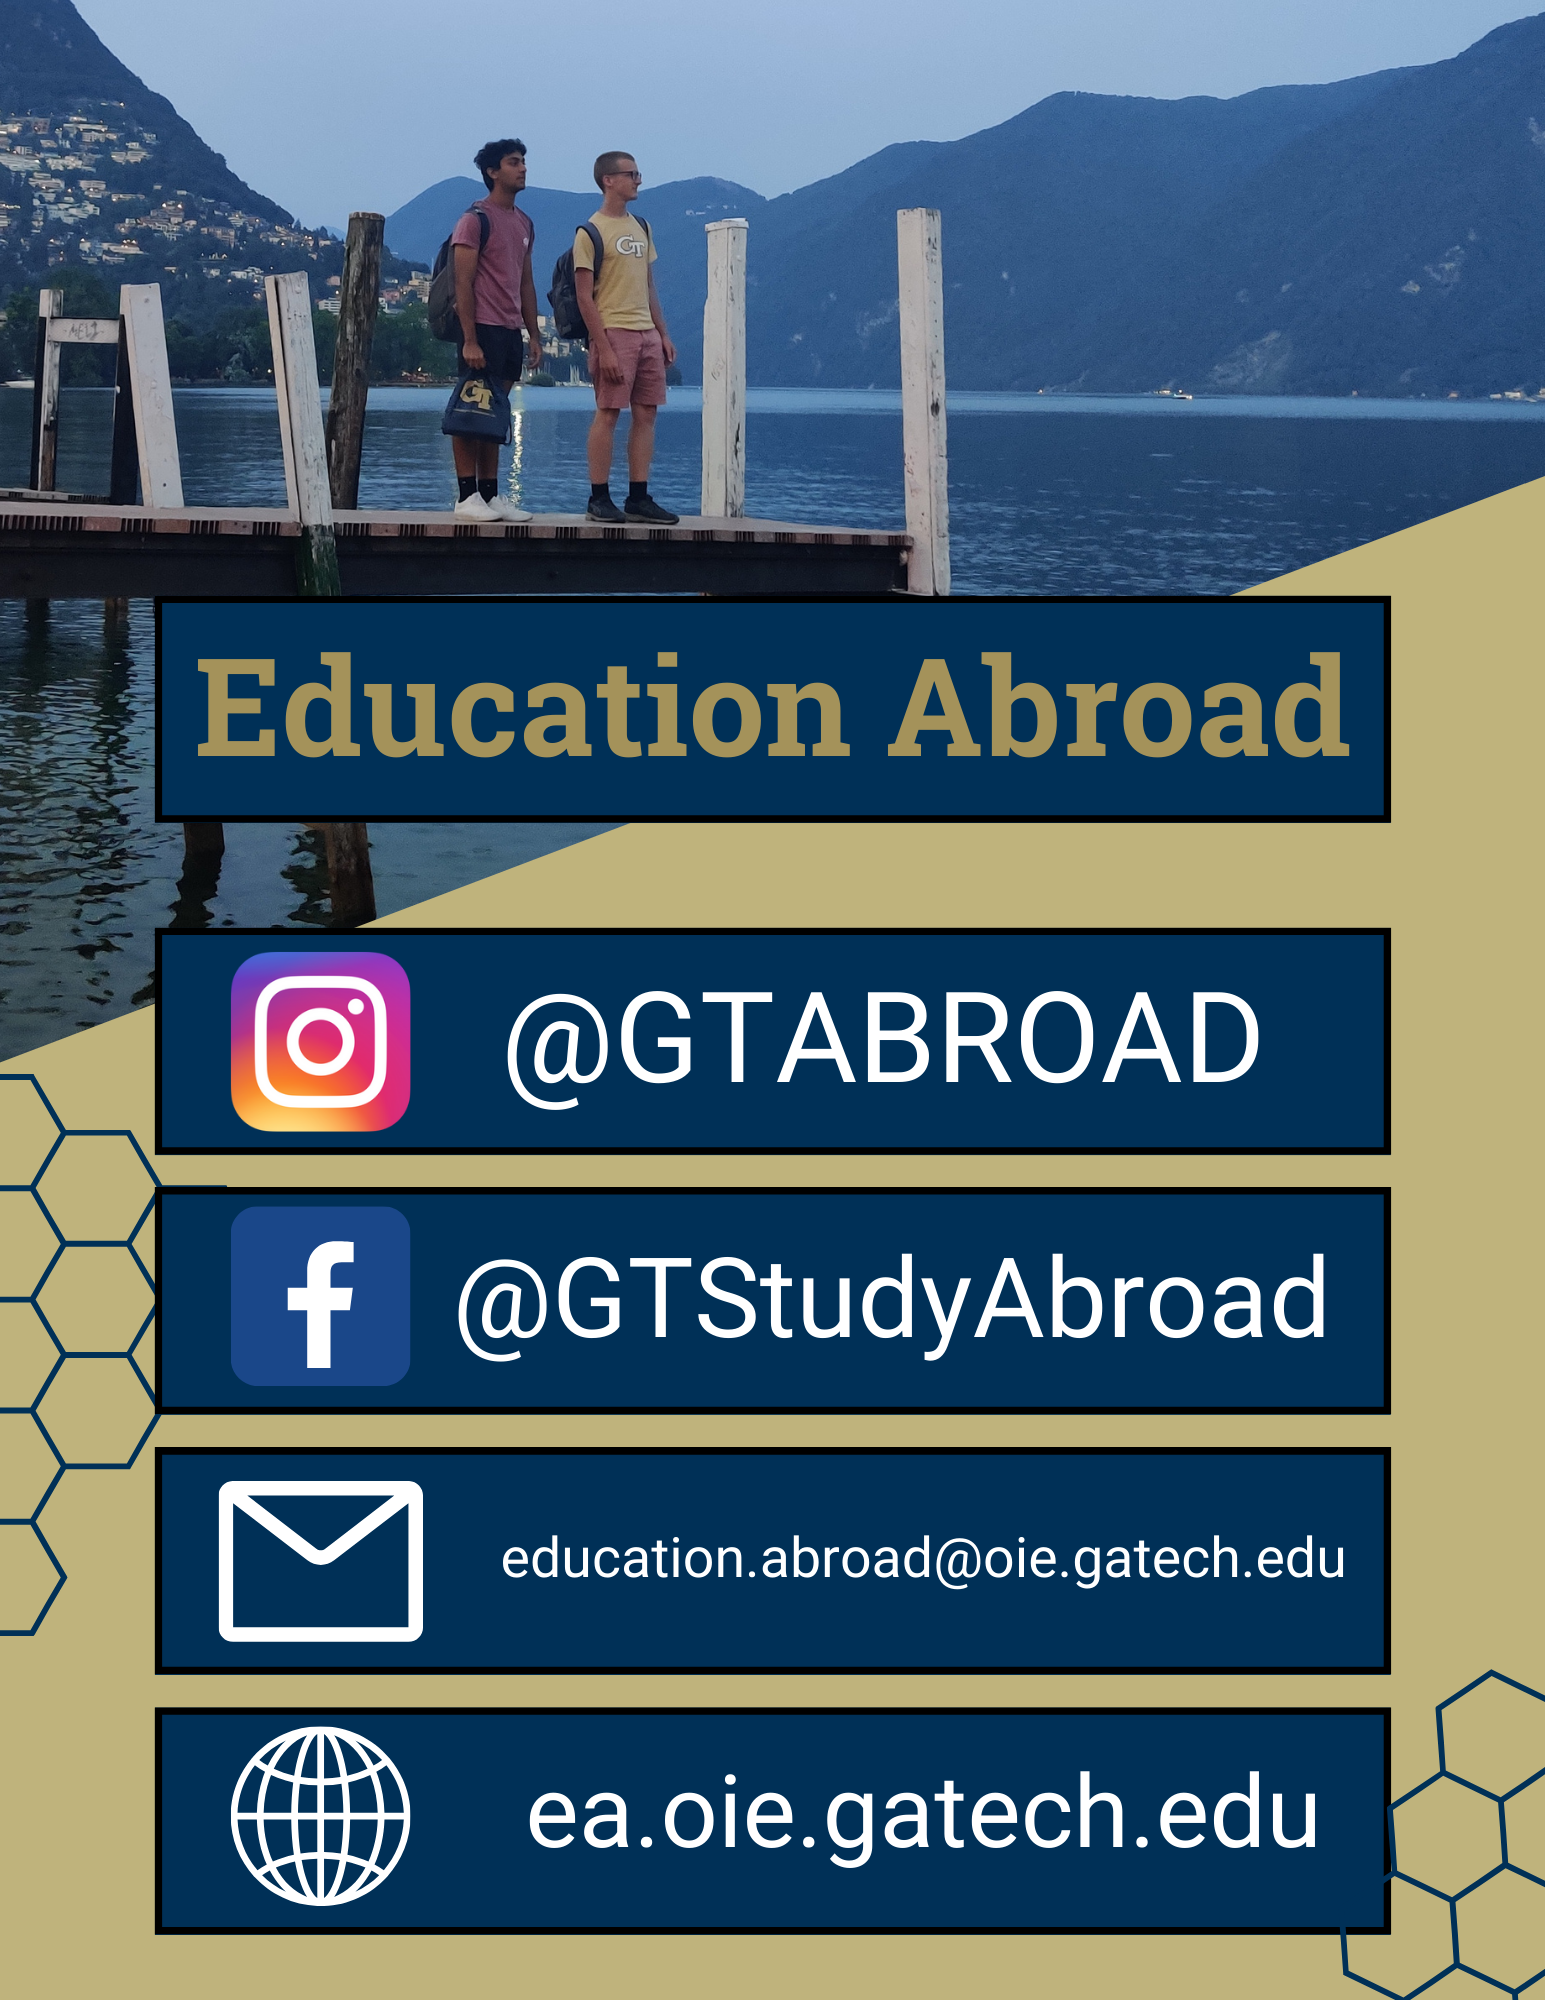 Social media information for Education Abroad Office